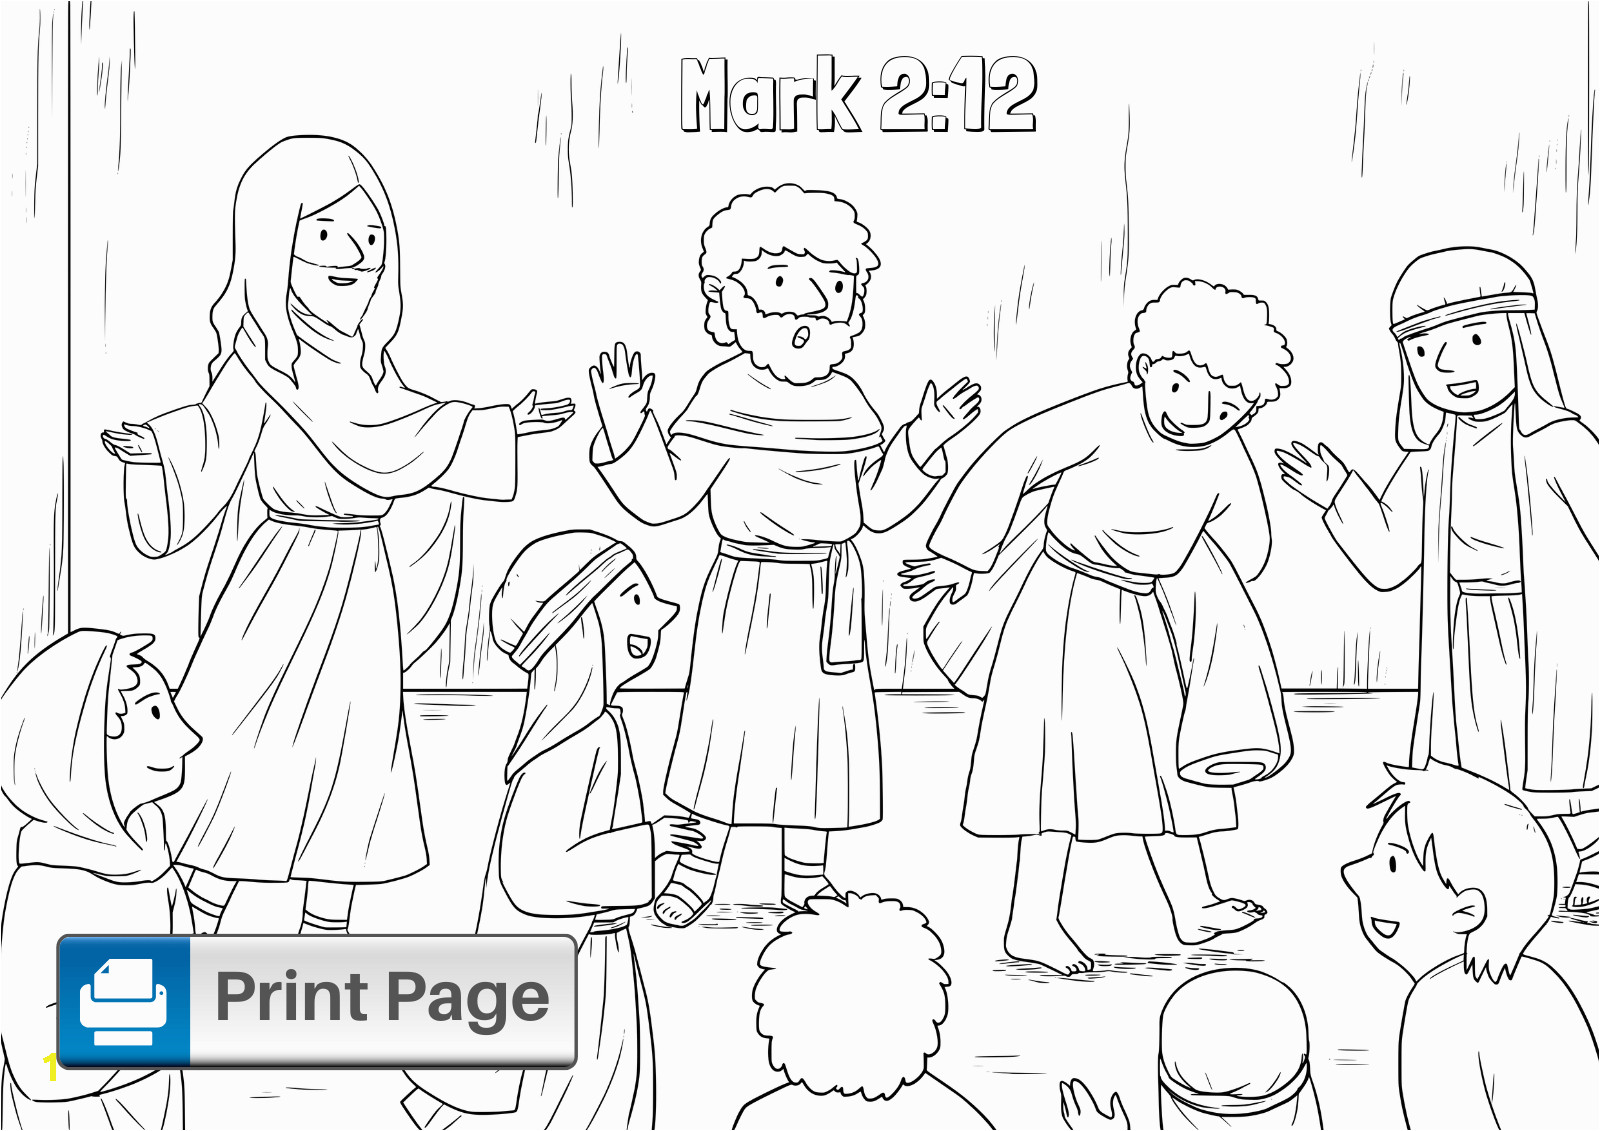 Coloring Page Of Jesus Healing the Paralytic Jesus Heals the Paralytic Man Coloring Pages for Kids